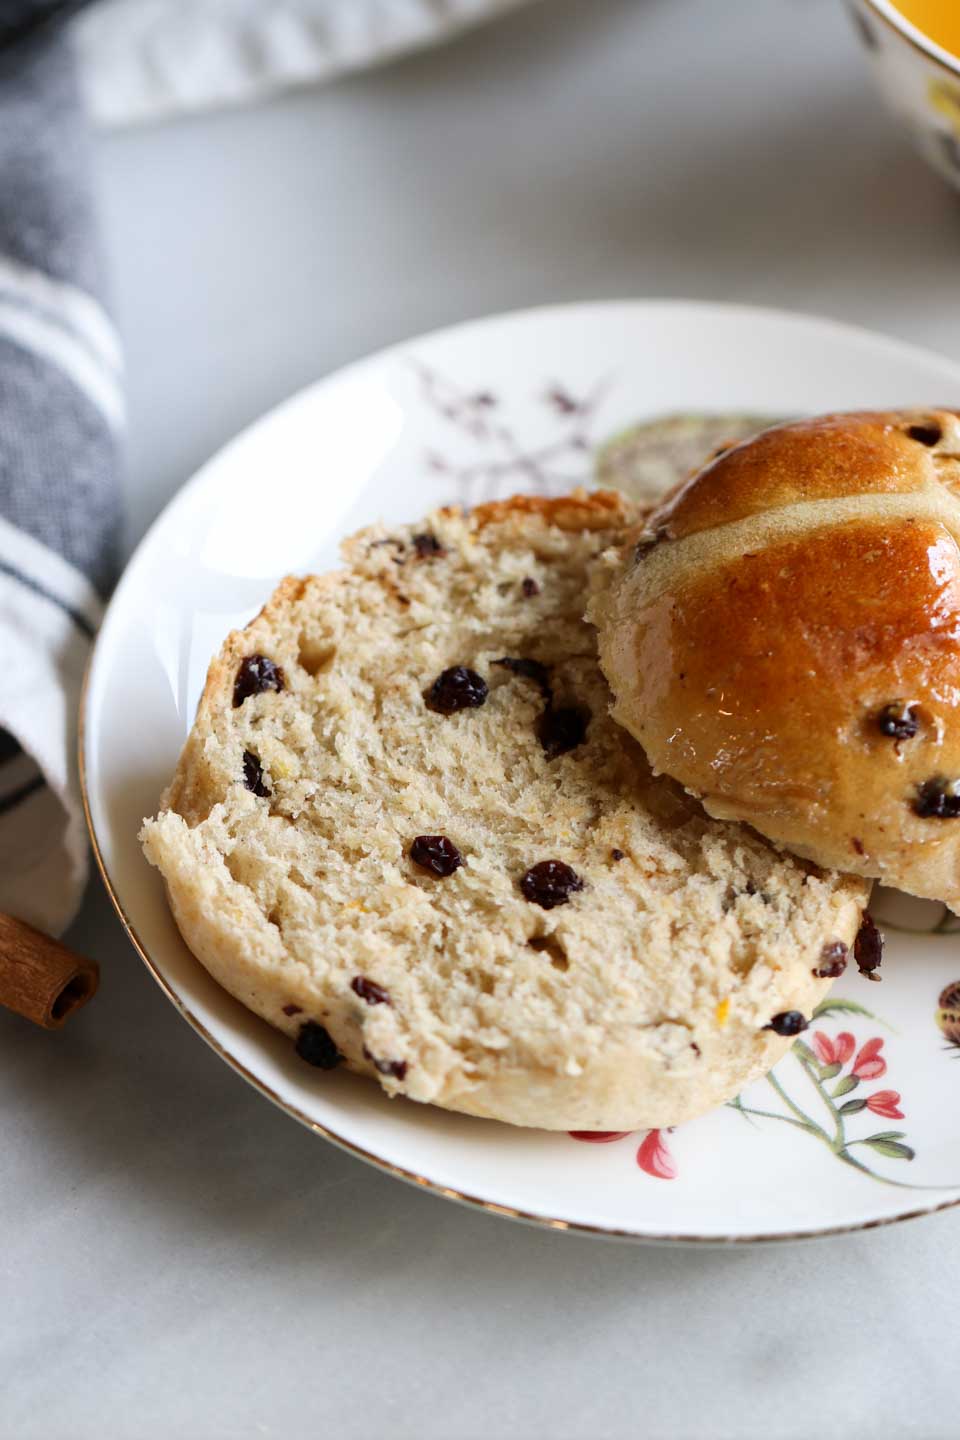 Eggless Hot Cross Buns with currants, orange zest and warm cinnamon.  